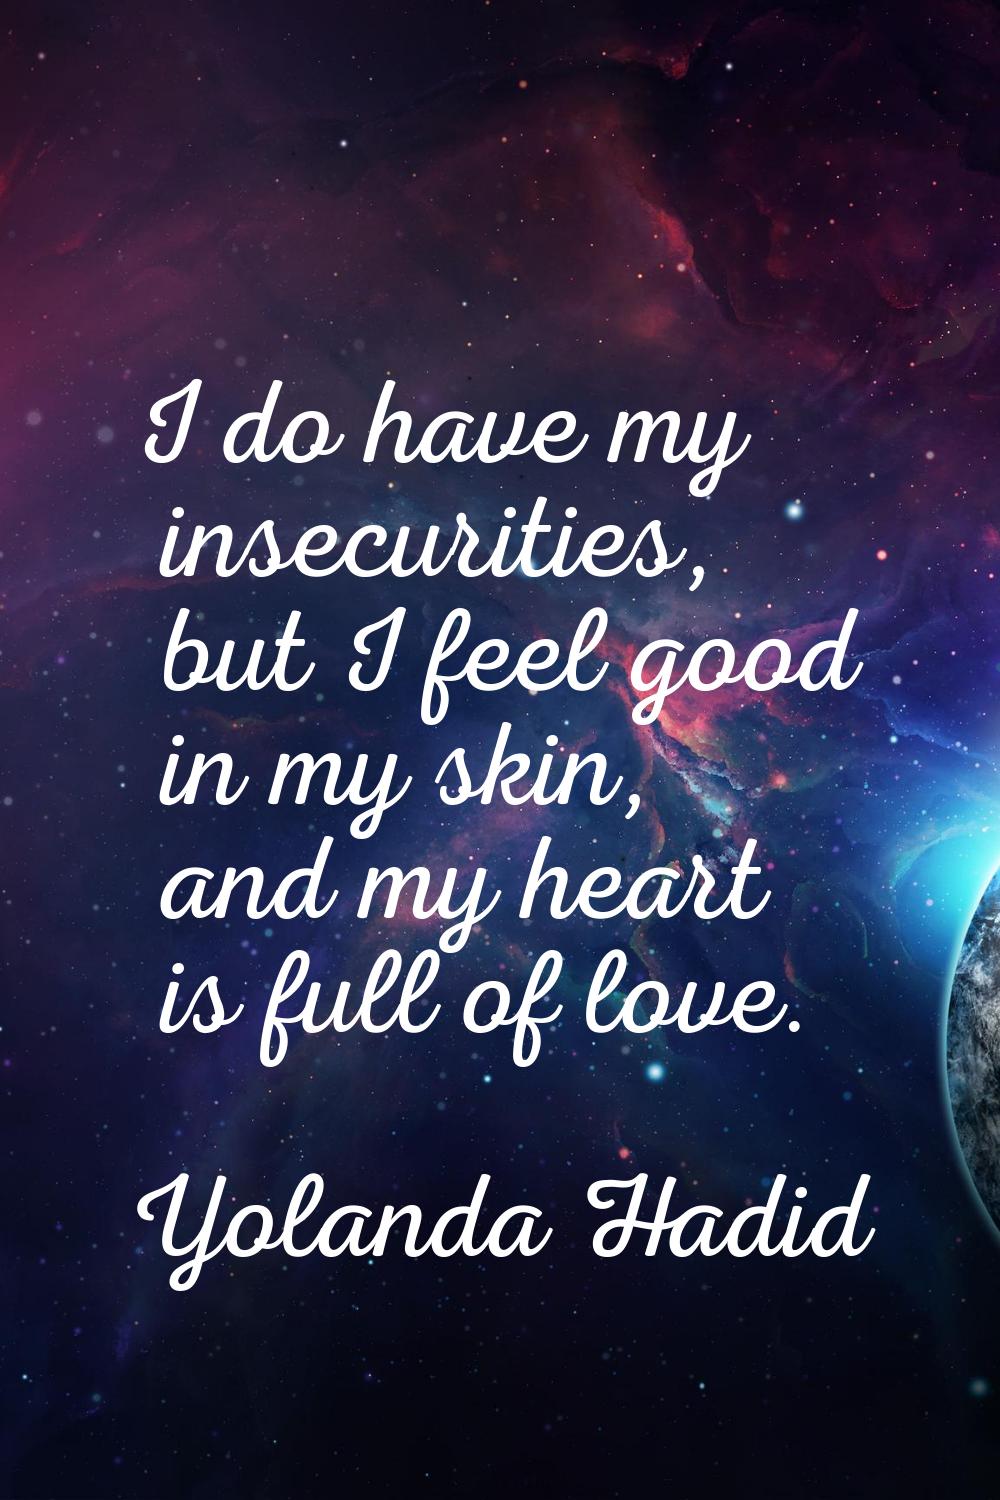 I do have my insecurities, but I feel good in my skin, and my heart is full of love.